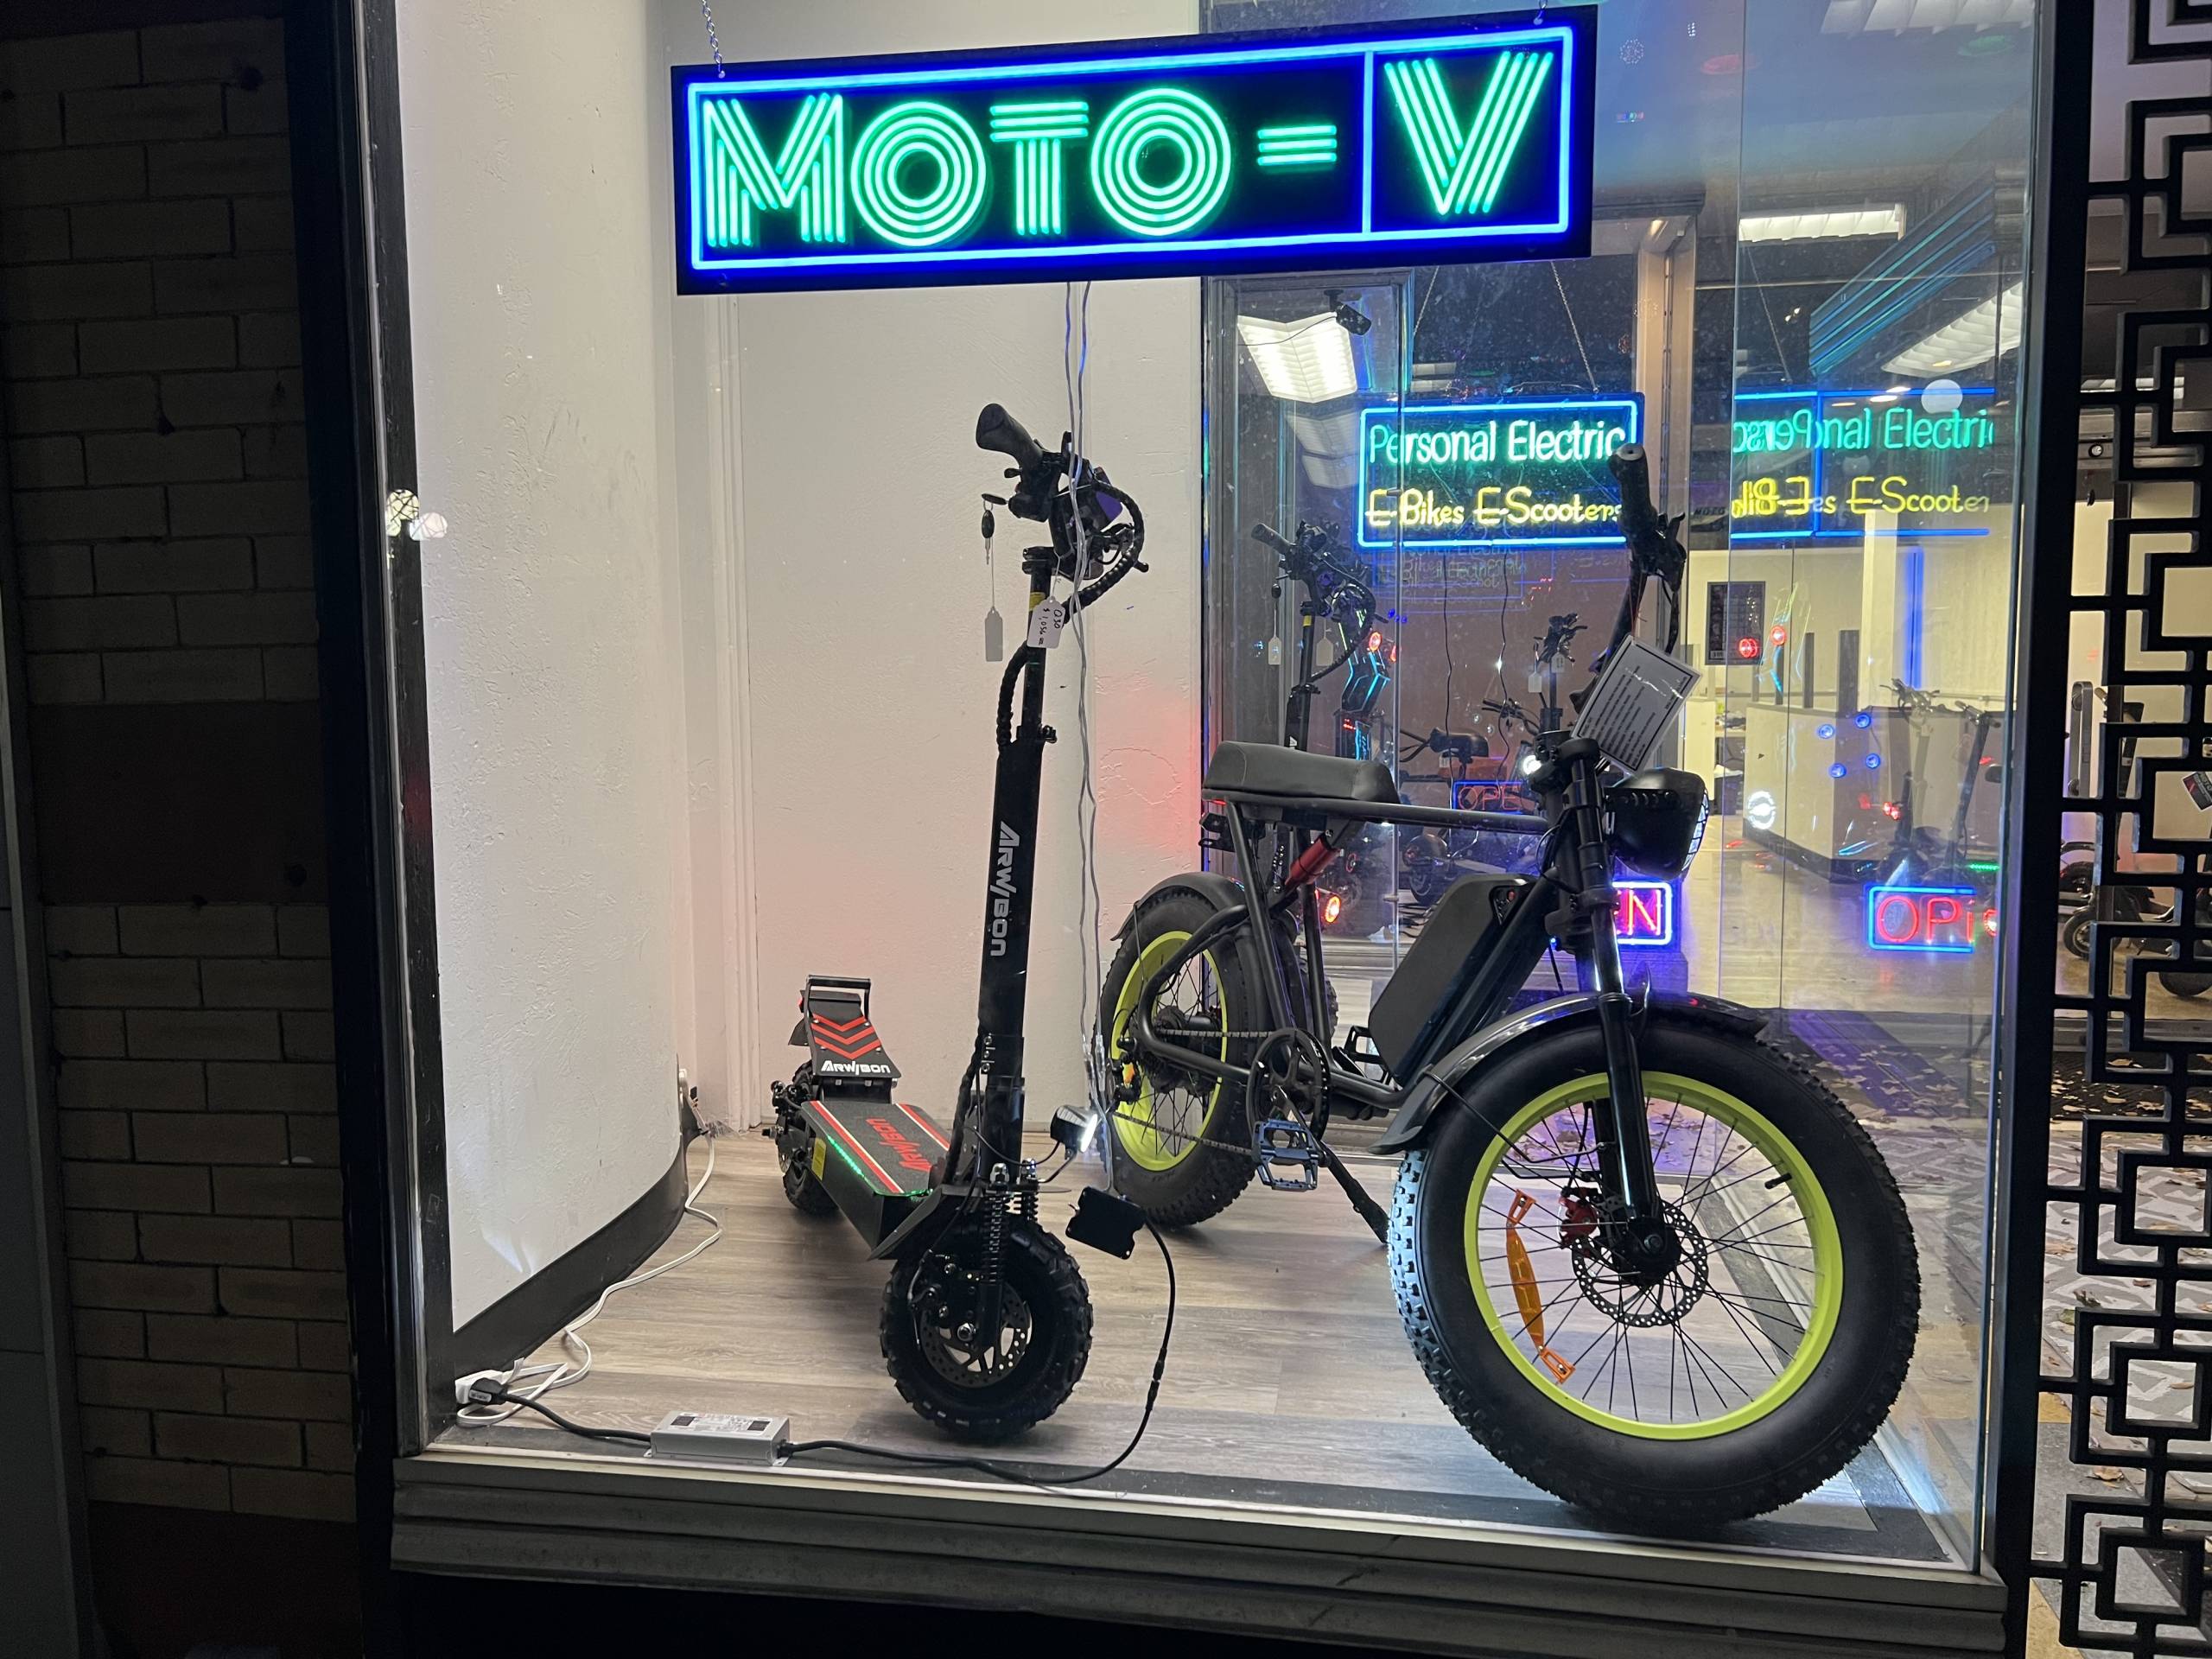 Moto-V Grand Opening Event in Beautiful Downtown Bloomington